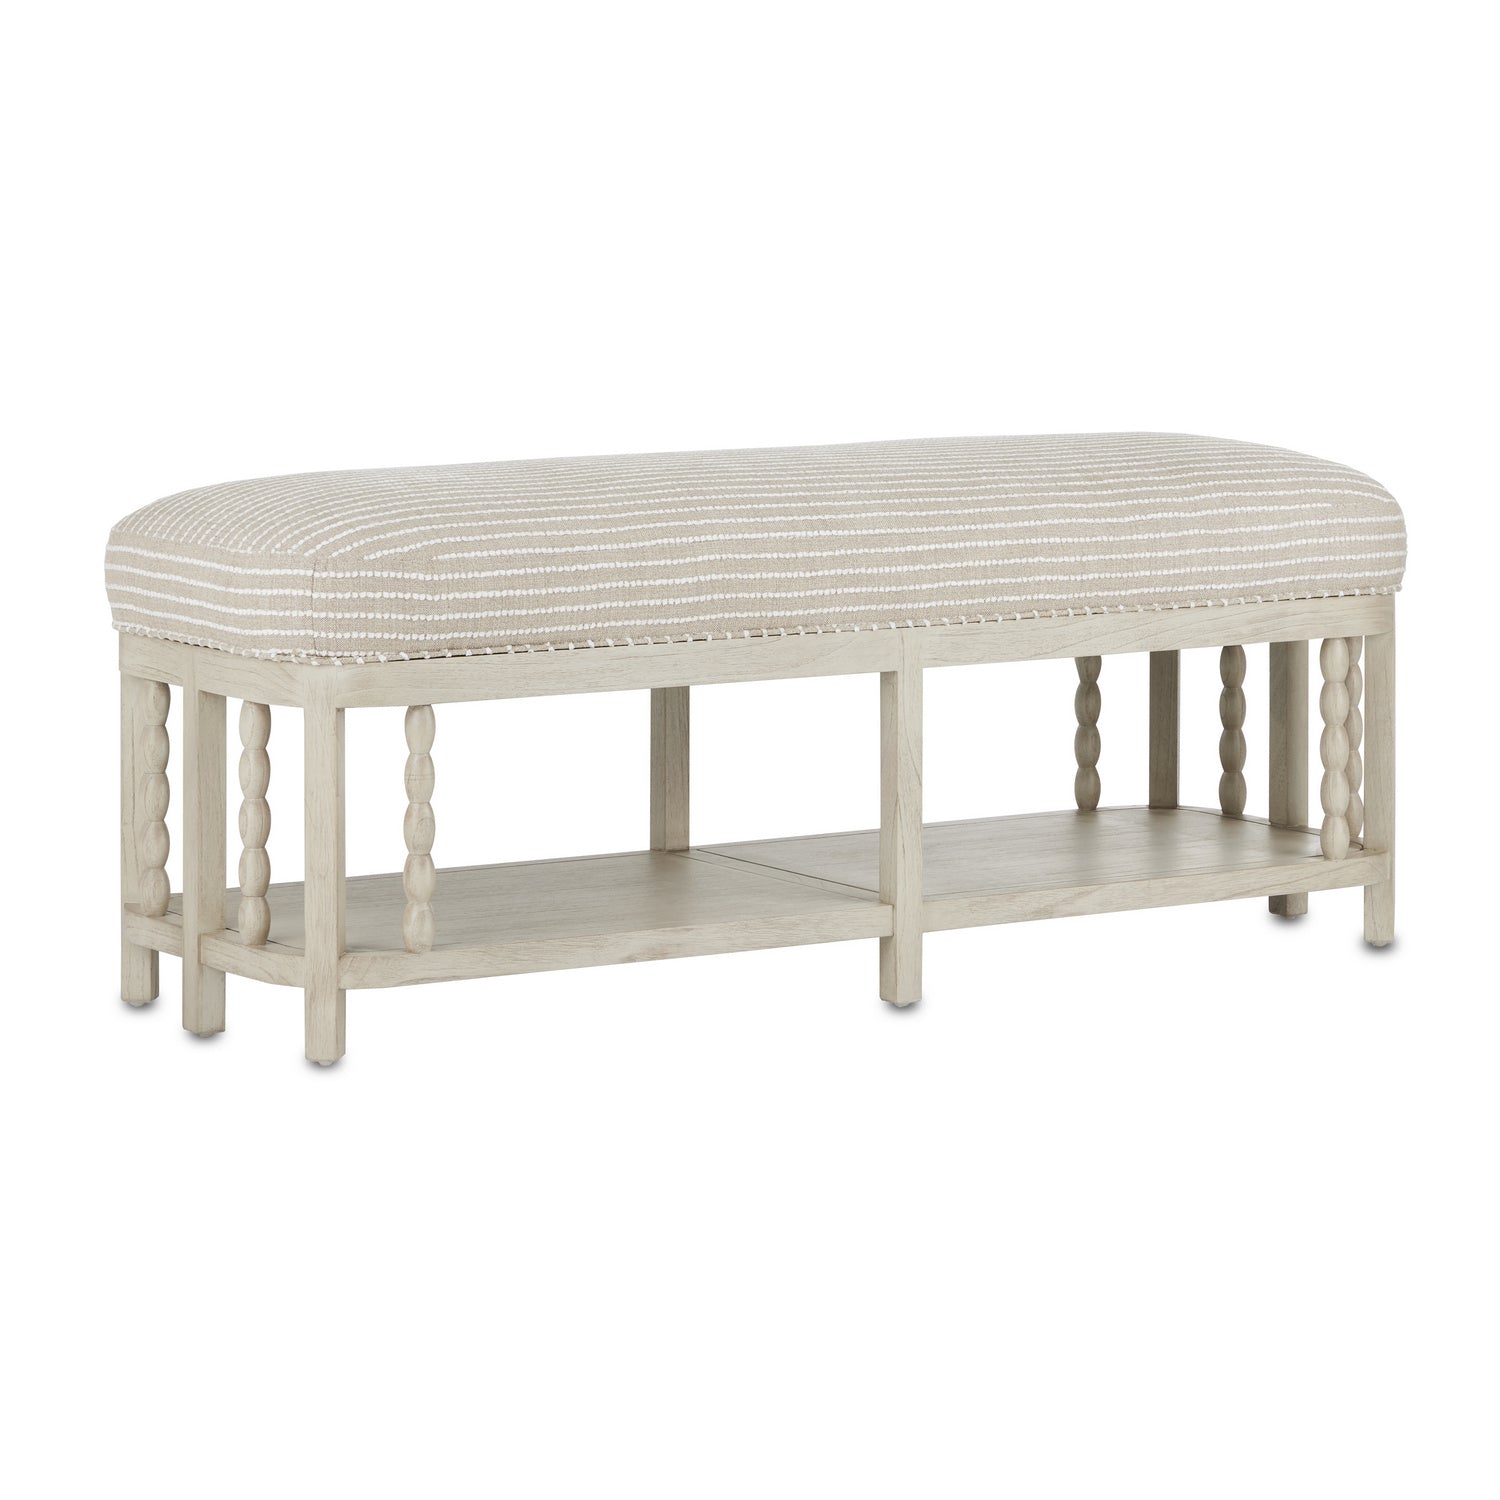 Bench from the Norene collection in Fog Gray finish